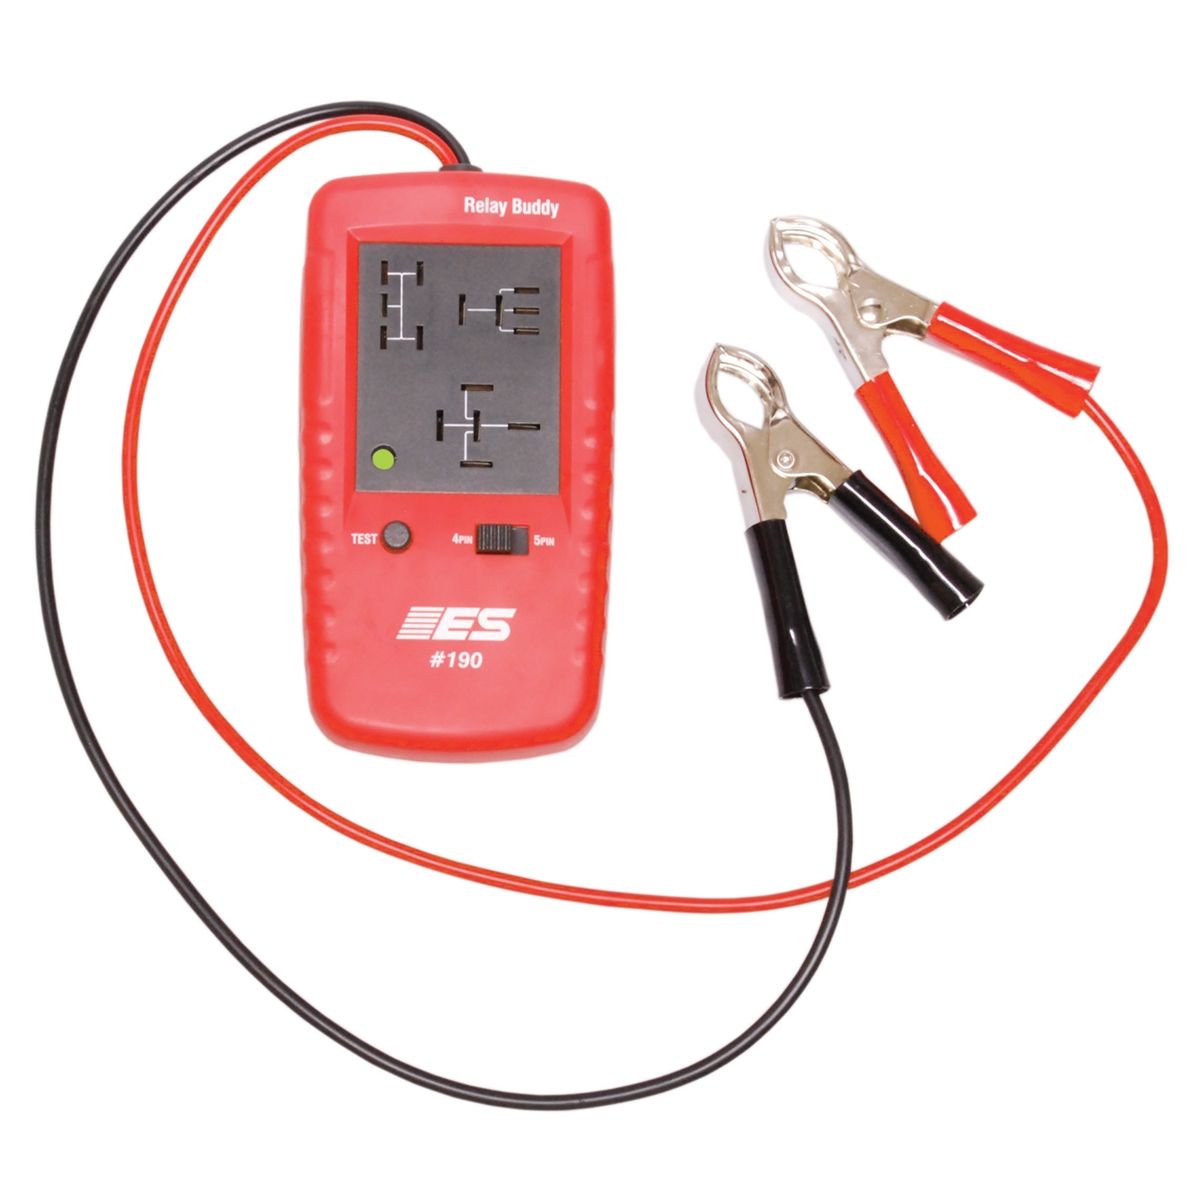 Details about   28 volt Relay Tester 